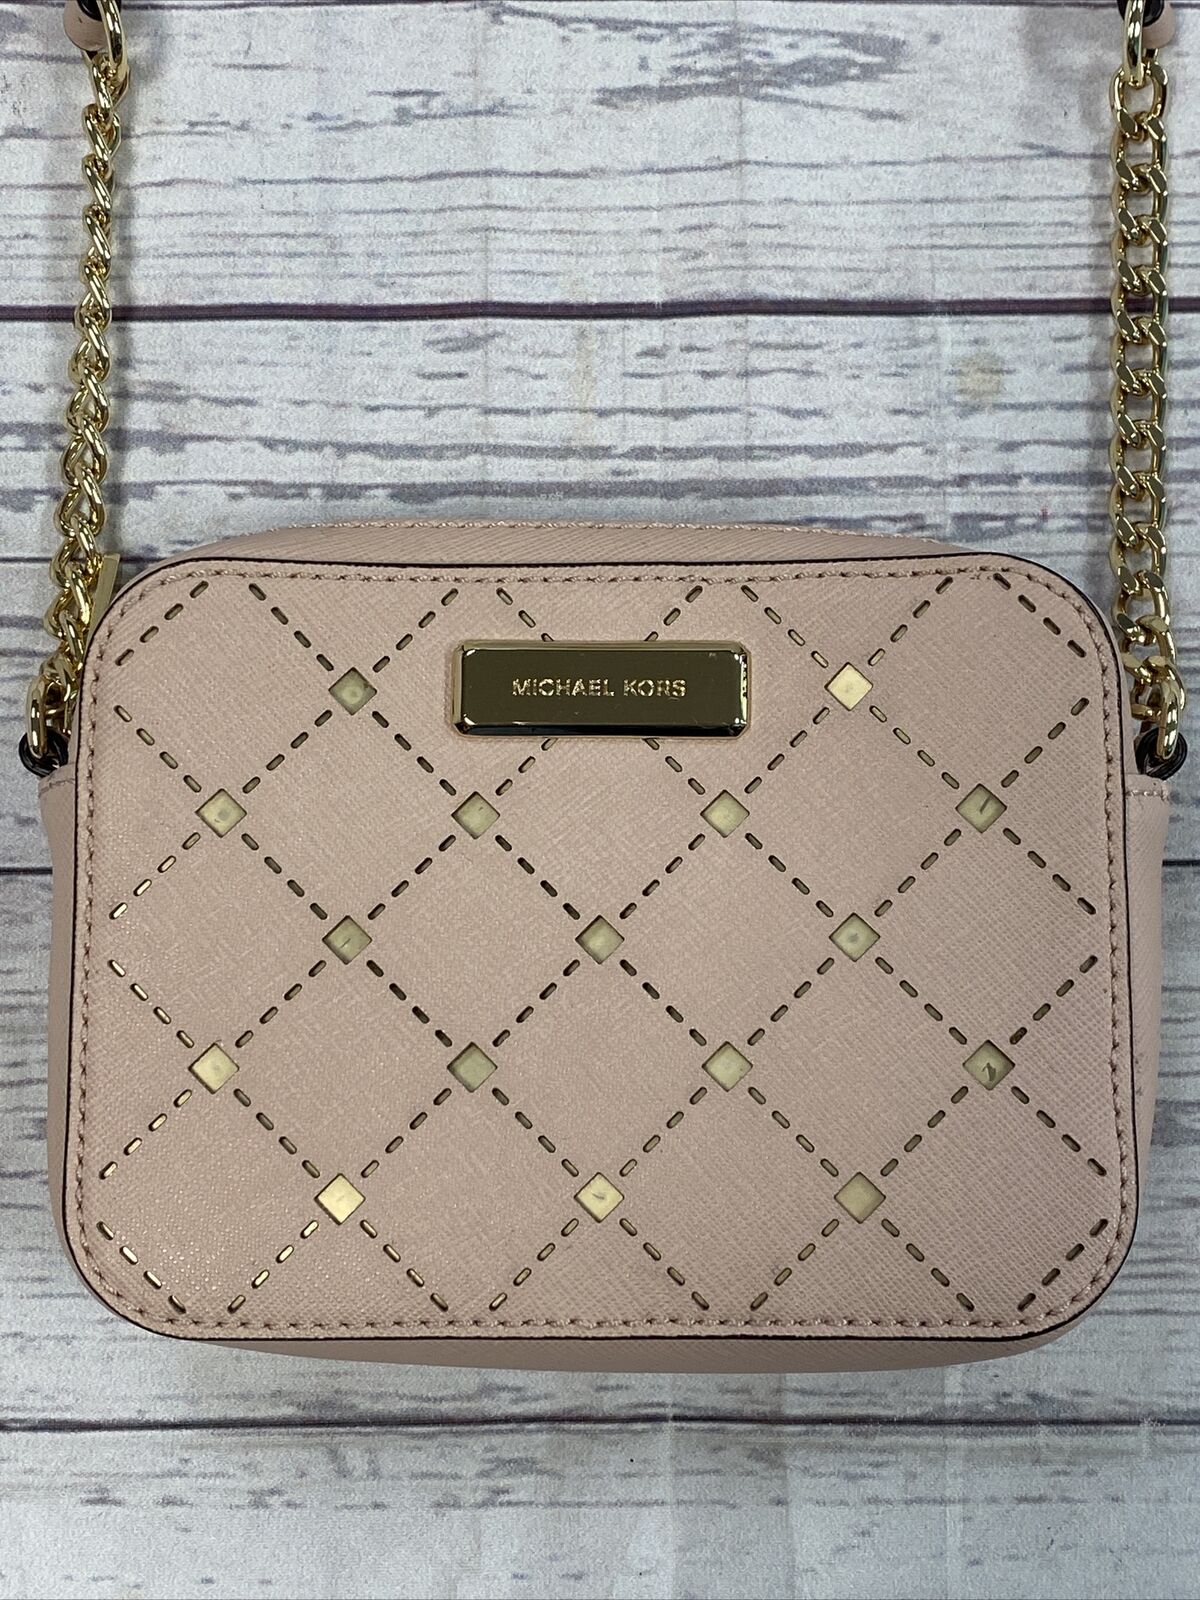 Michael Kors Crossbody Purse. - clothing & accessories - by owner - apparel  sale - craigslist